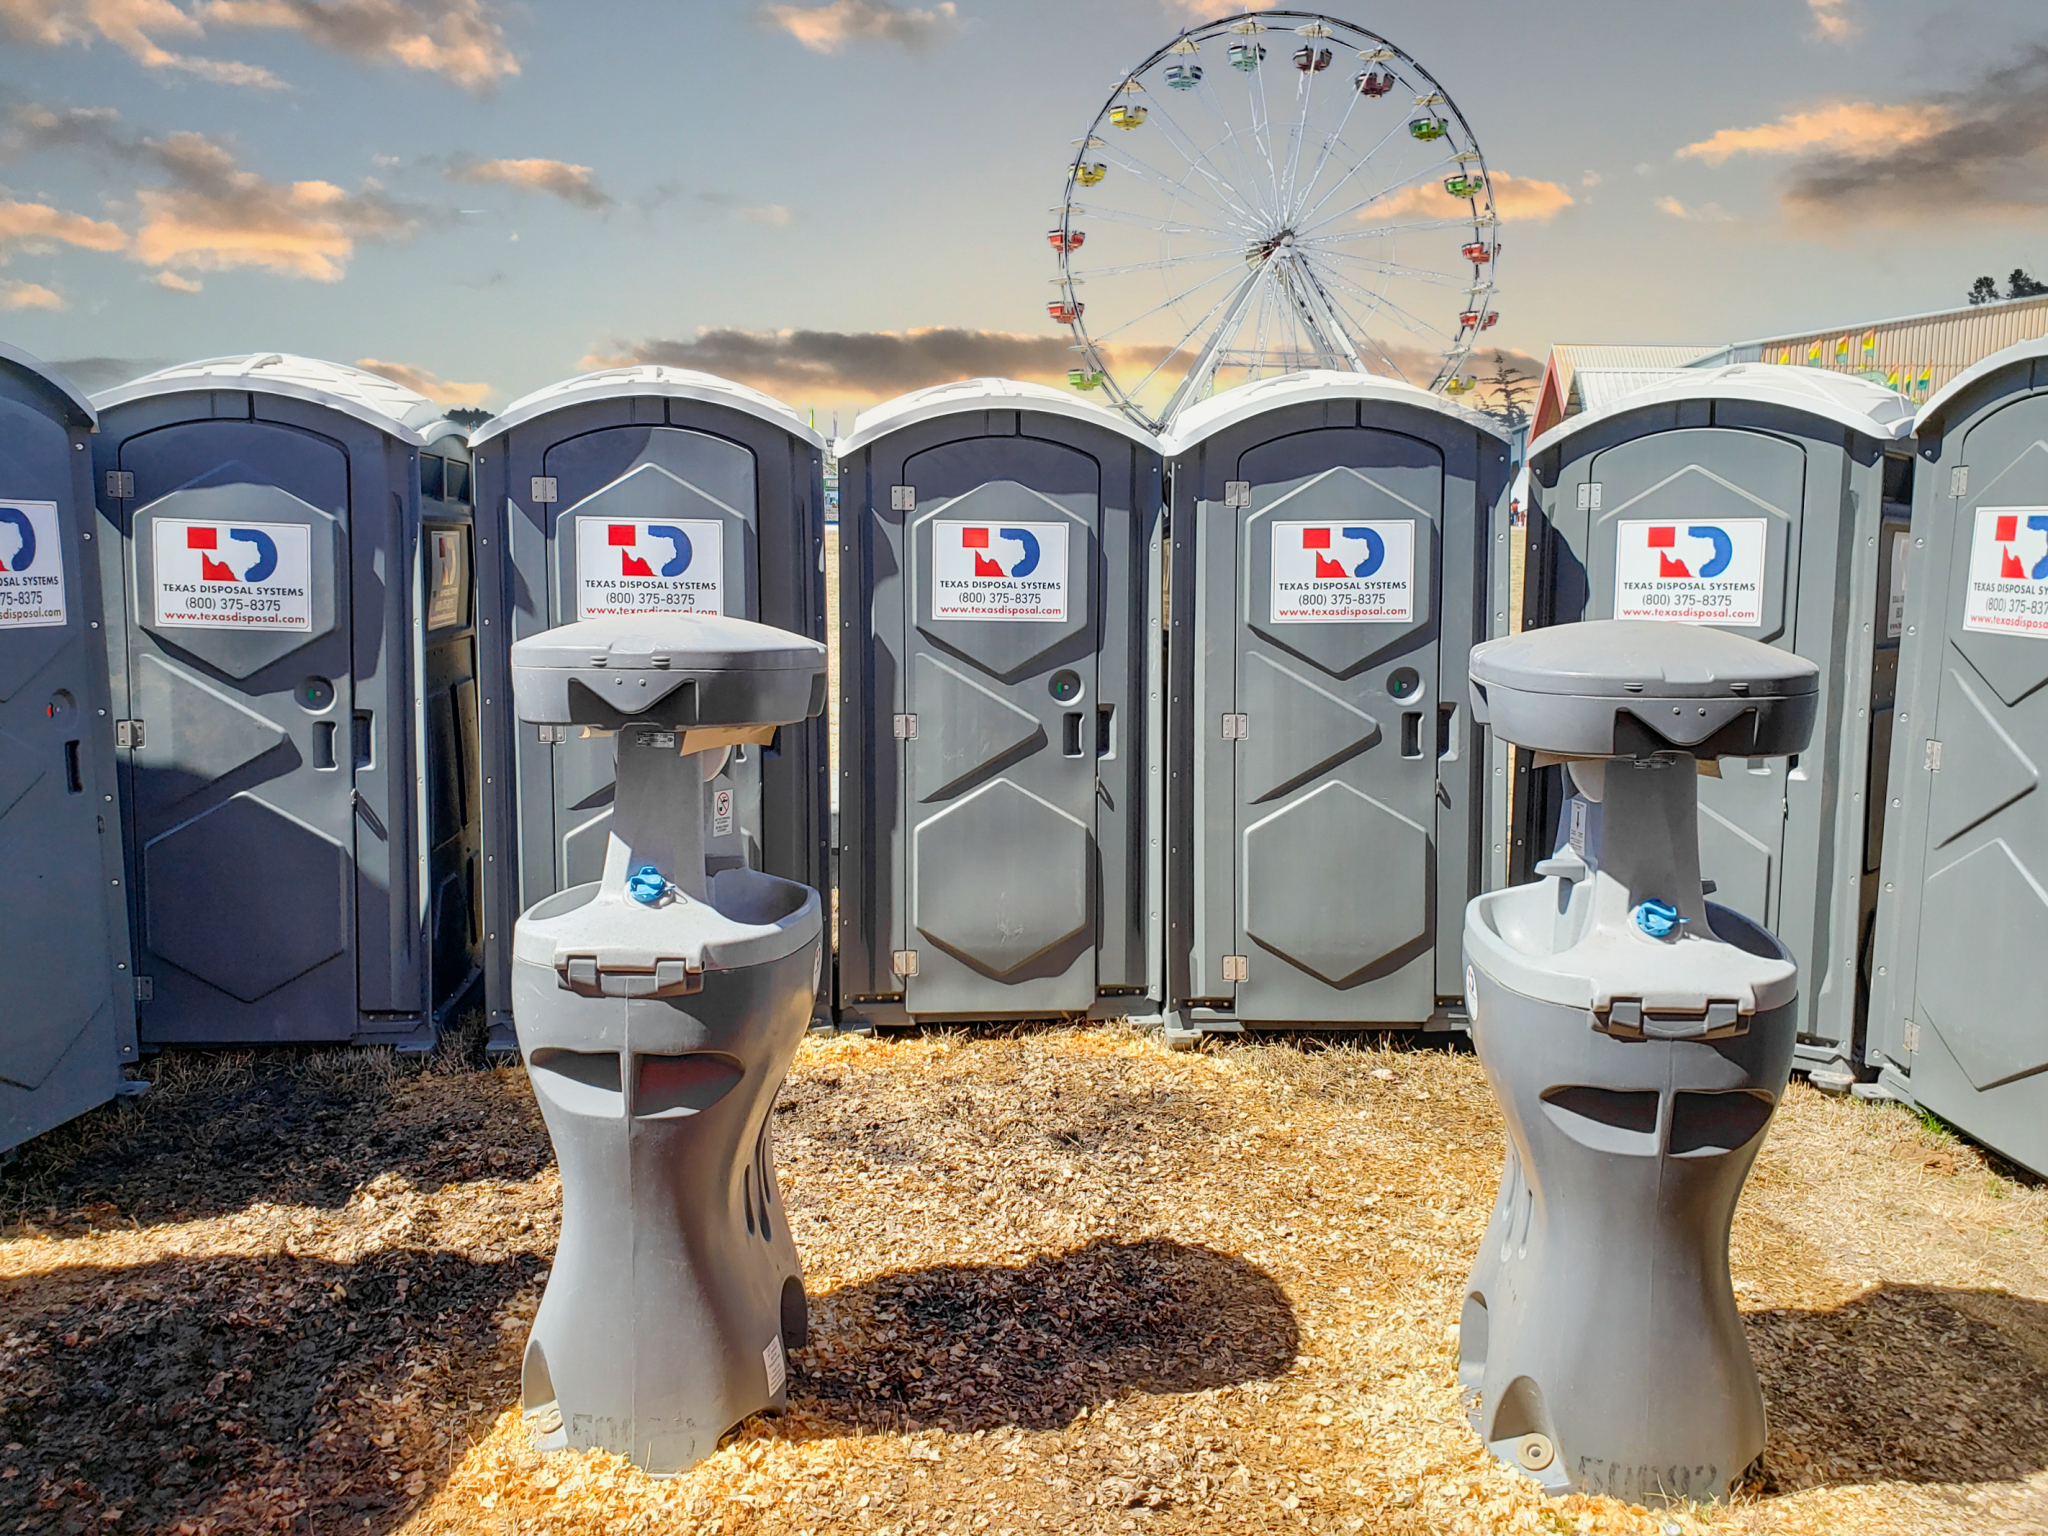 Restrooms and hand washing stations at Rodeo Austin